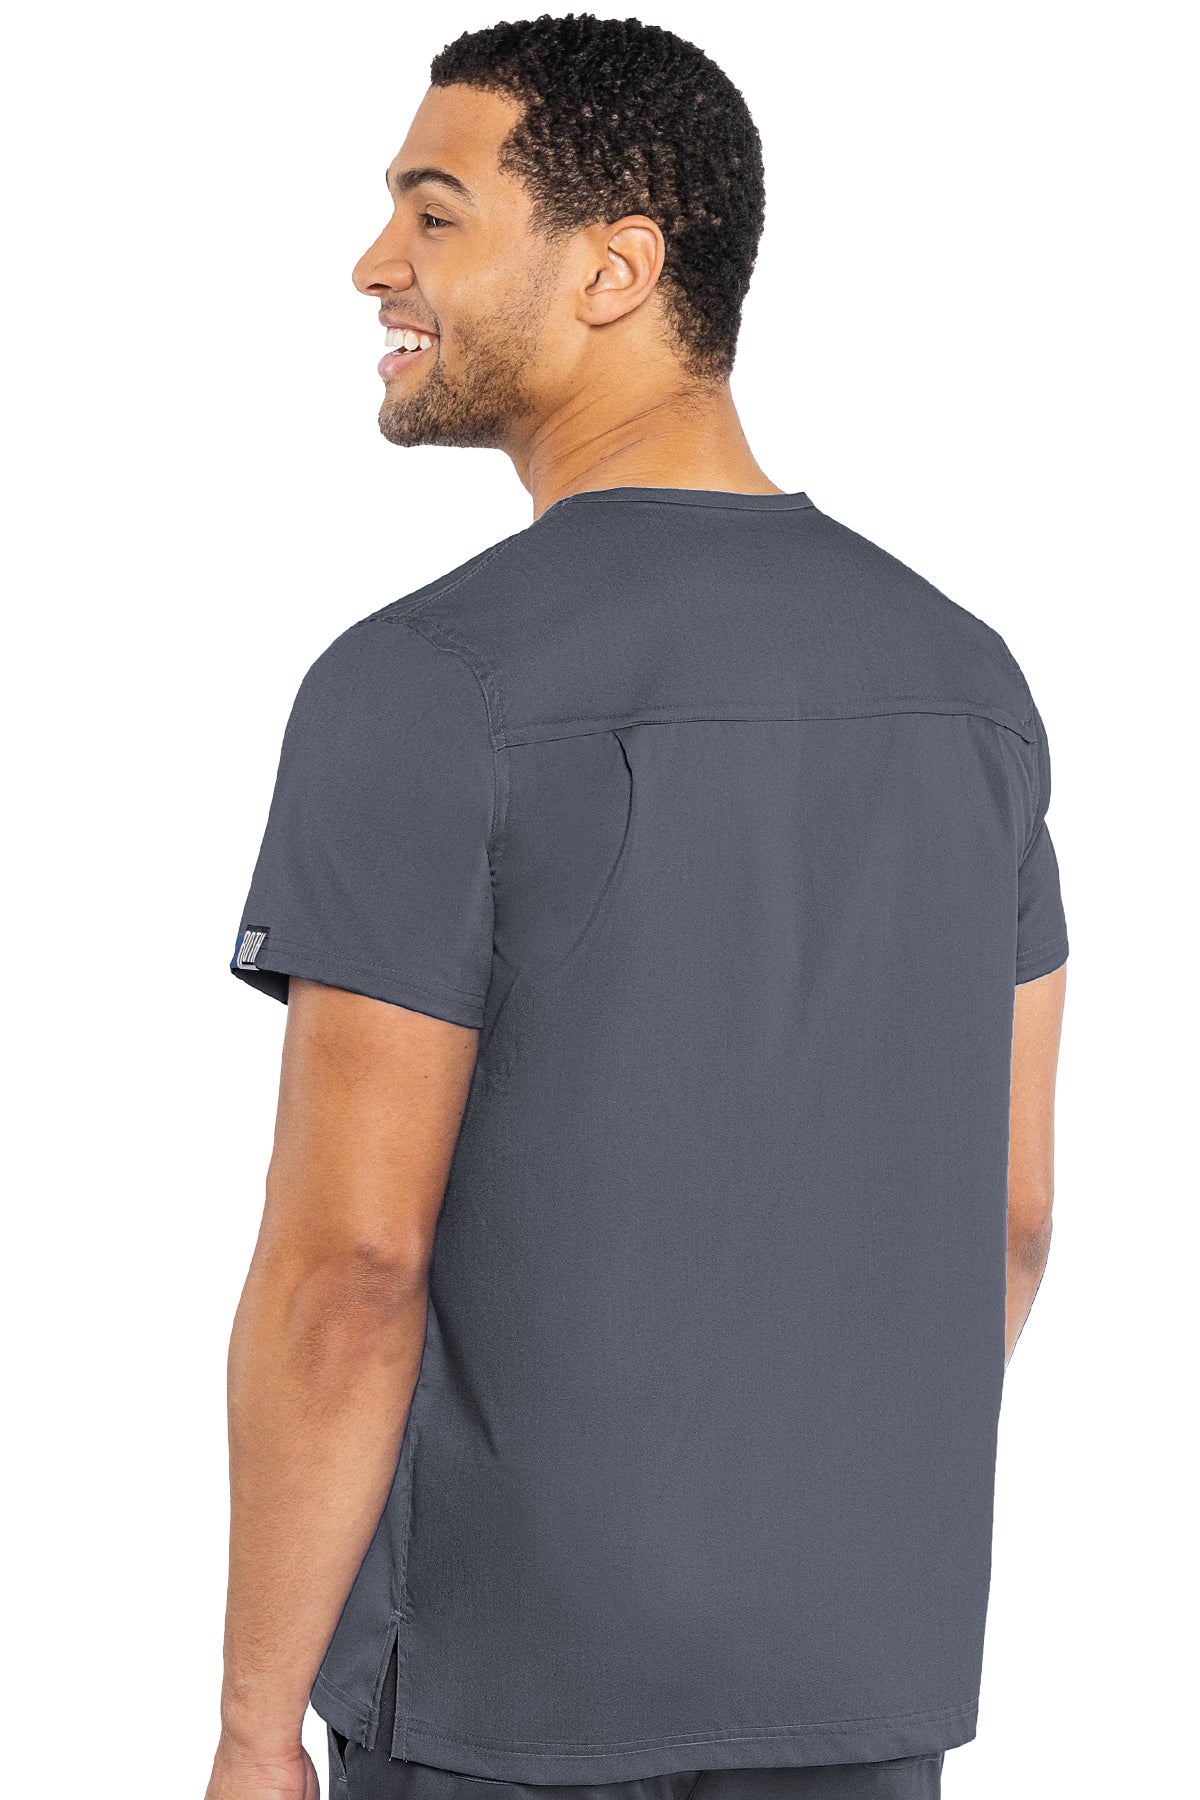 Med Couture Cadence One Pocket Top